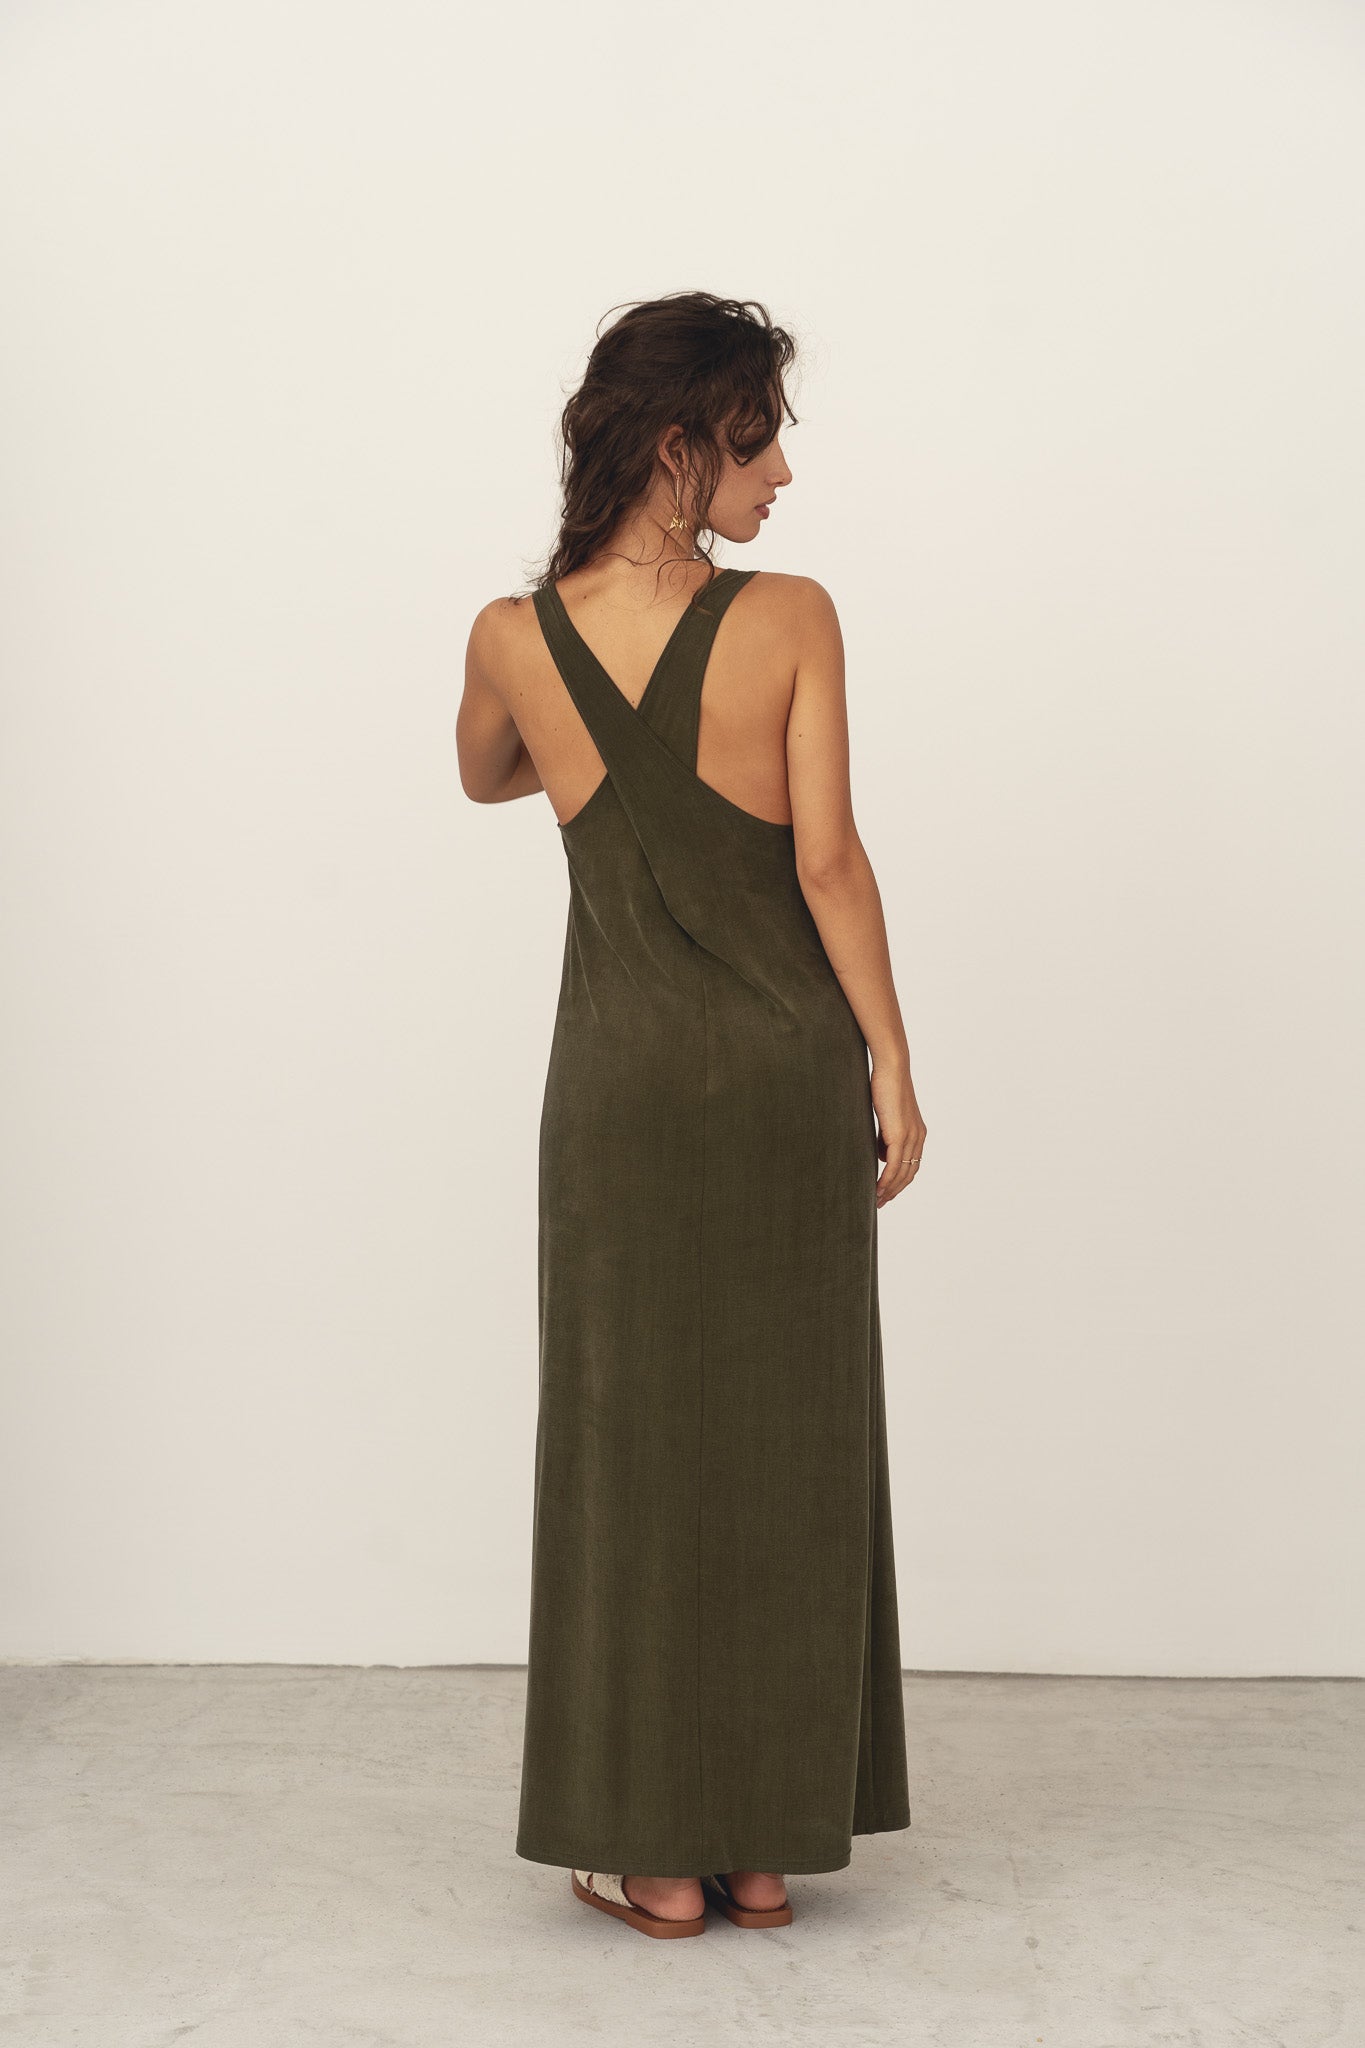 Naz women's cupro midi summer dress in dark green. Features side slit high neckline cross-over back. Made sustainably in Portugal.